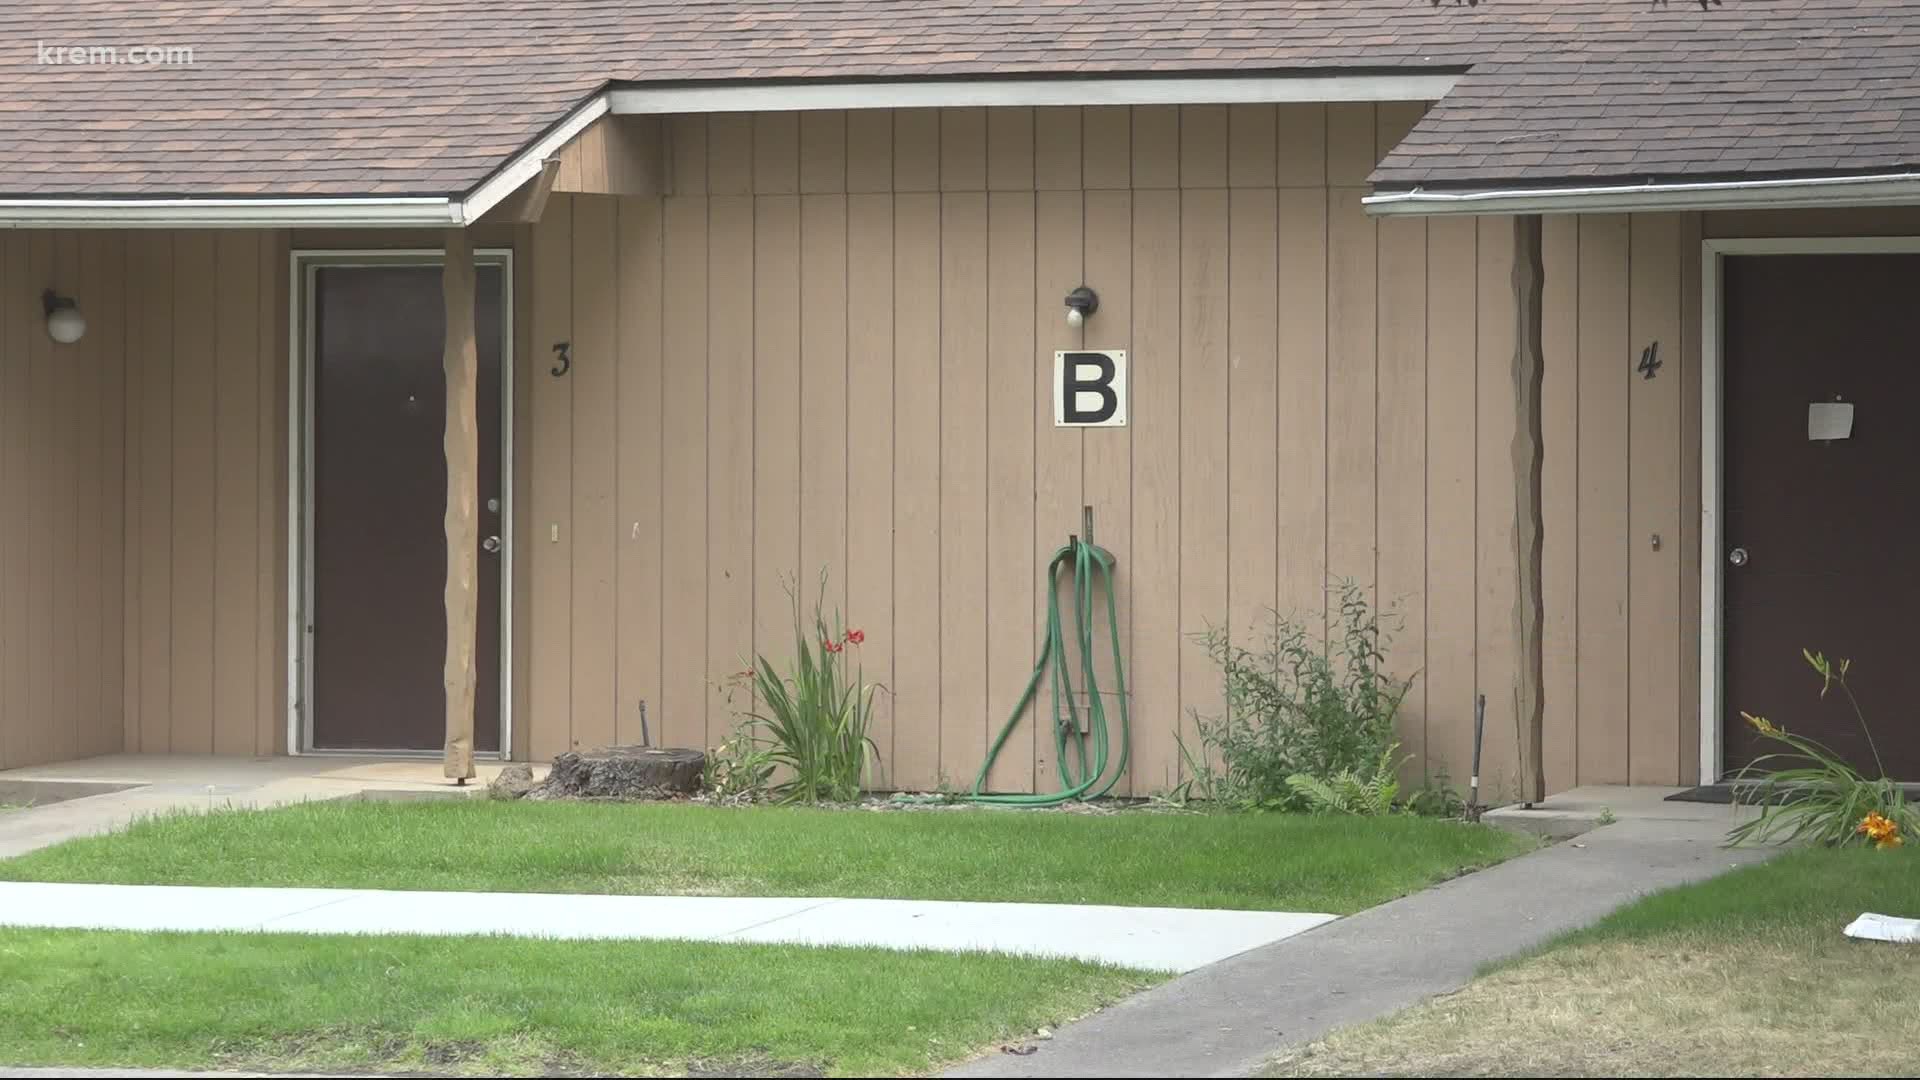 Spokane is seeing some of the highest rent increases in the nation. Spokane's average rent has gone up 31%.